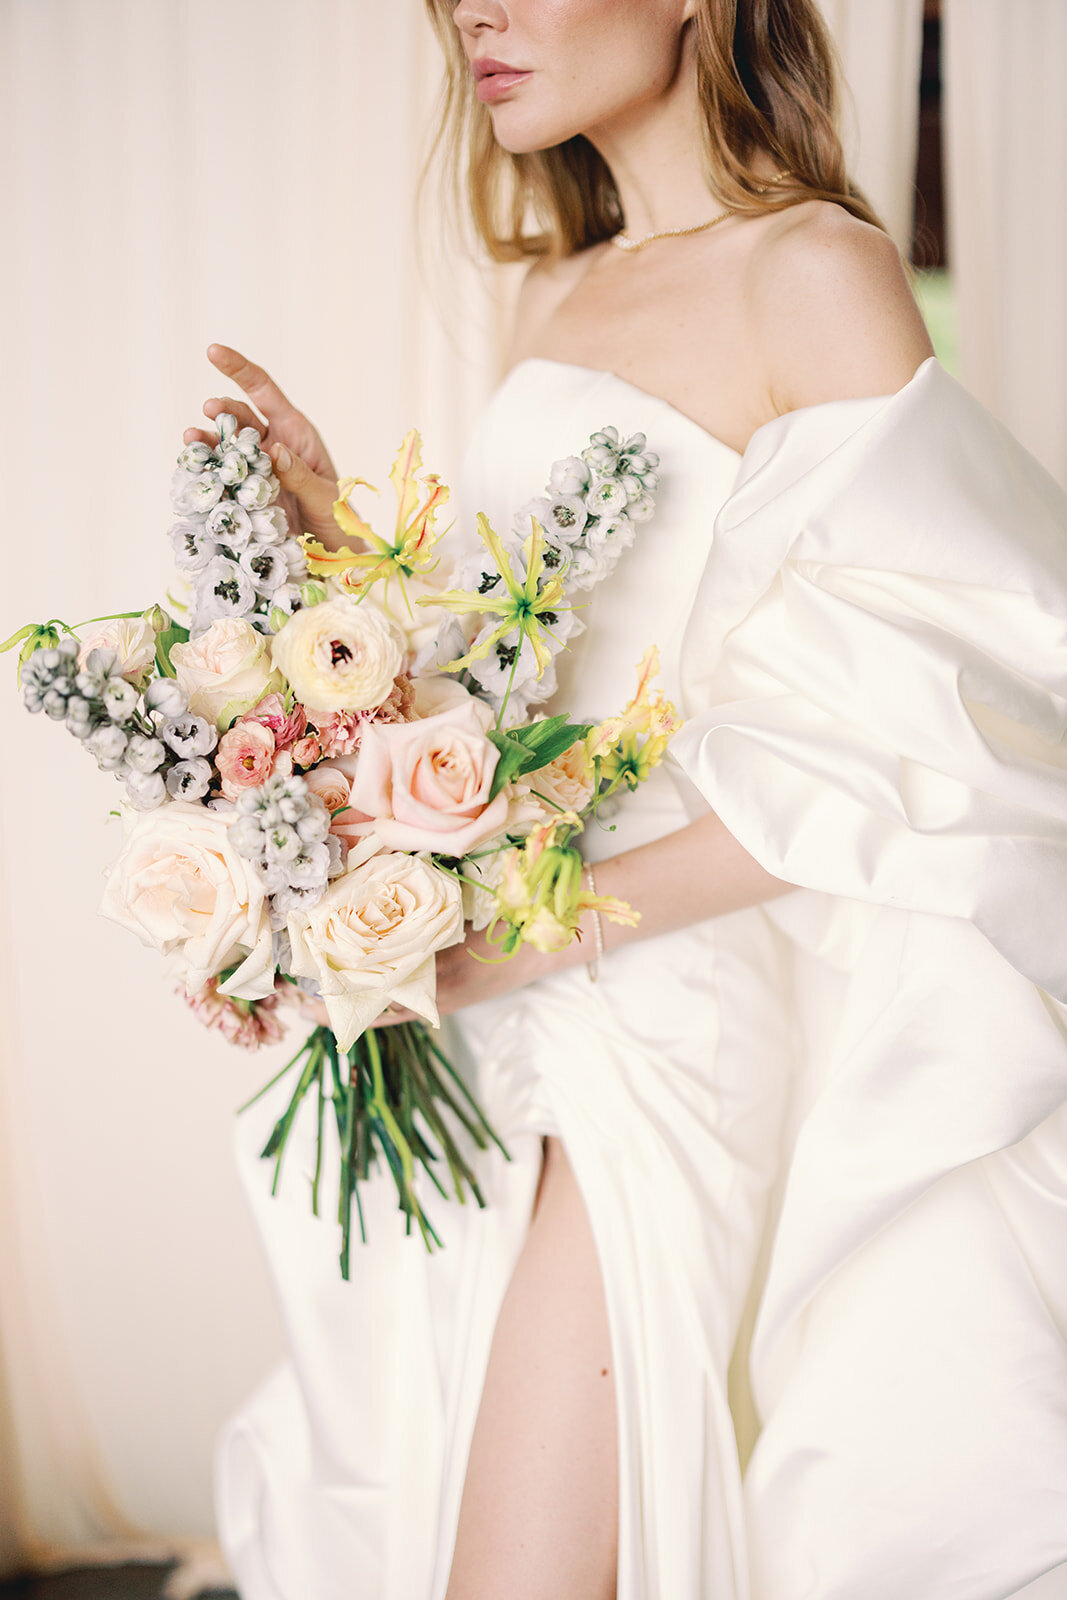 Close-up of a bride holding a pastel colored flower bouquet